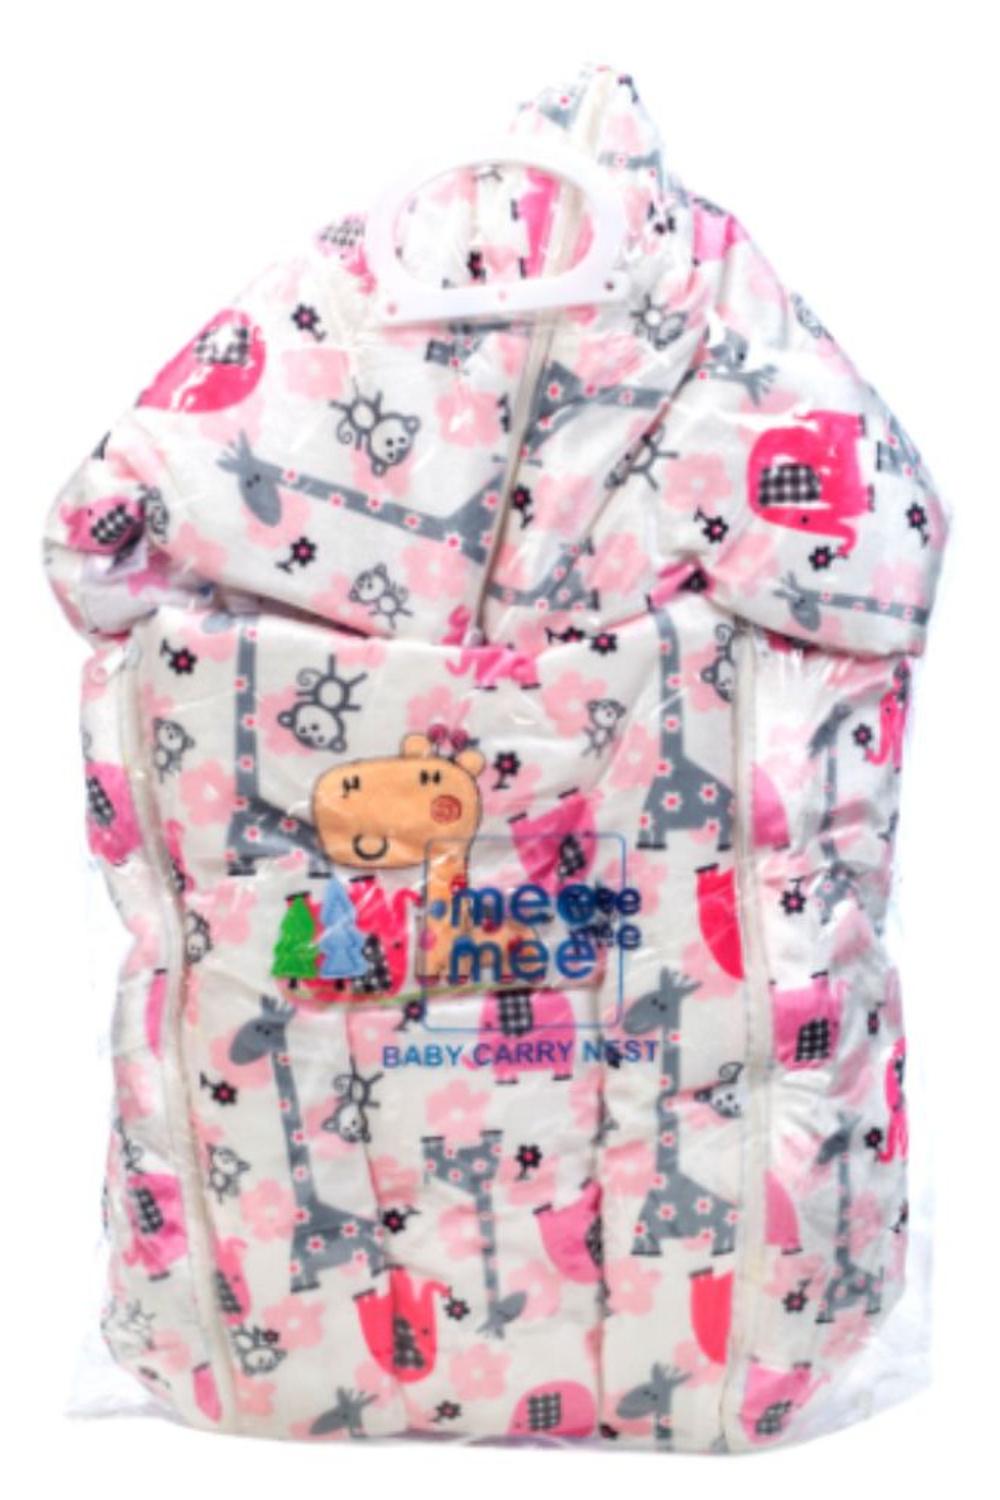 Mee Mee 3 in 1 Baby Carry Nest with Sleeping Bag and Mattress for Babies (Pink) (Pink Giraffe Print)